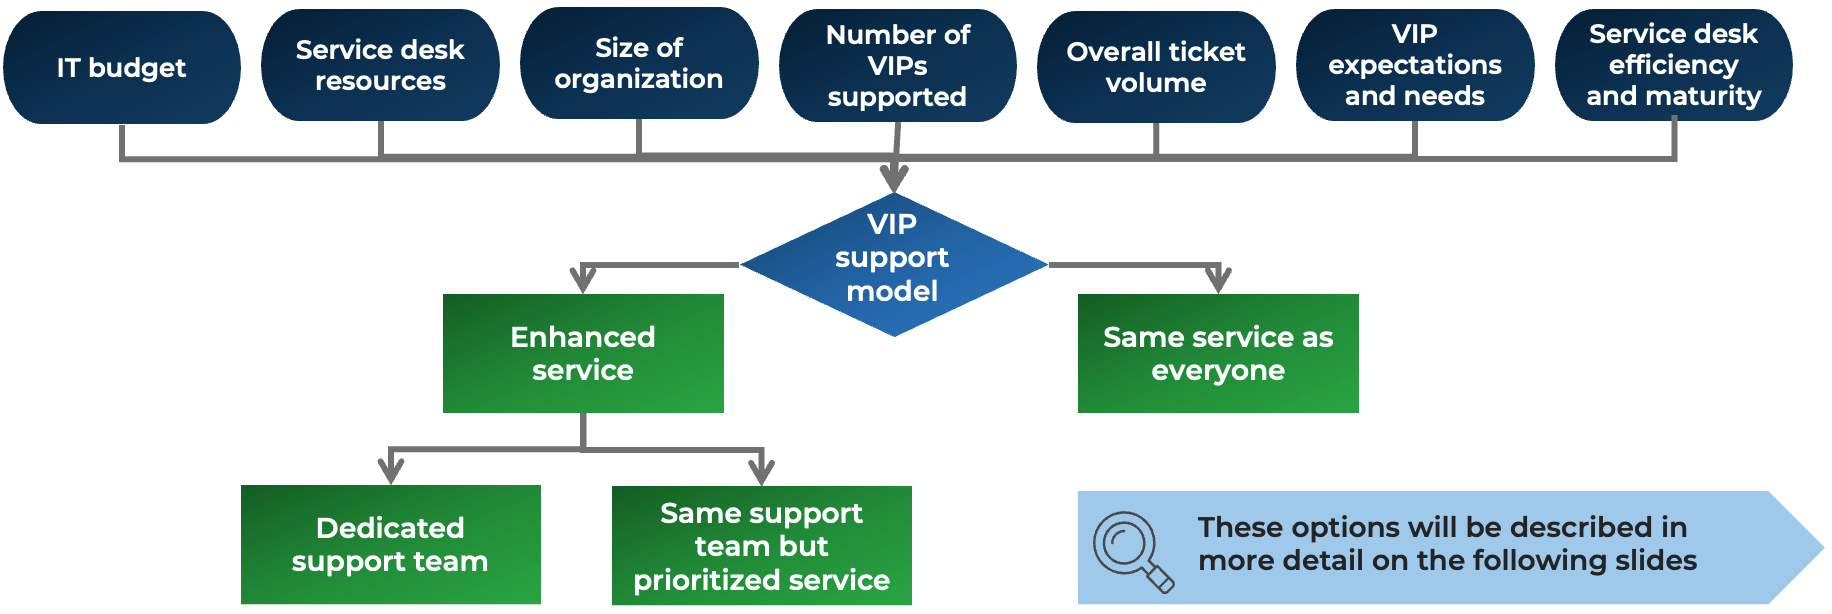 Factors such as IT budget, size of organization help determine which VIP support model you choose: Enhanced, or the same as everyone else. With enhanced service, you can opt to a dedicated support team or same support team but with prioritized service.